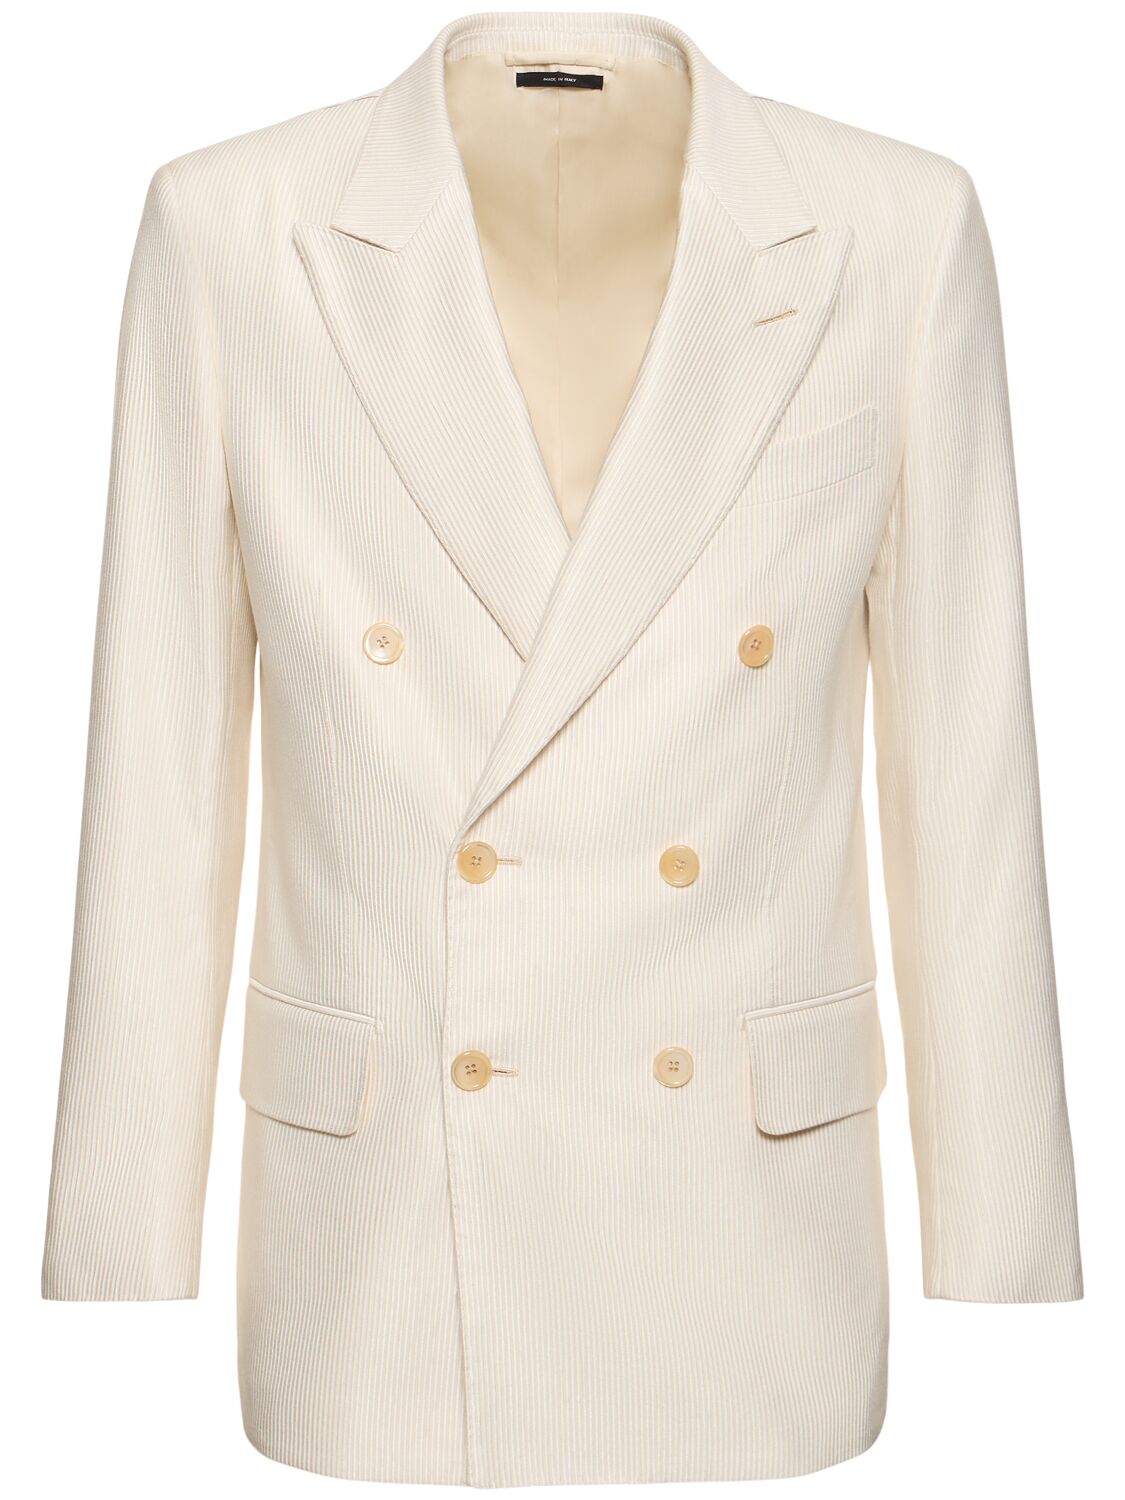 Tom Ford Atticus Double-breasted Silk-canvas Suit Jacket In Ivory